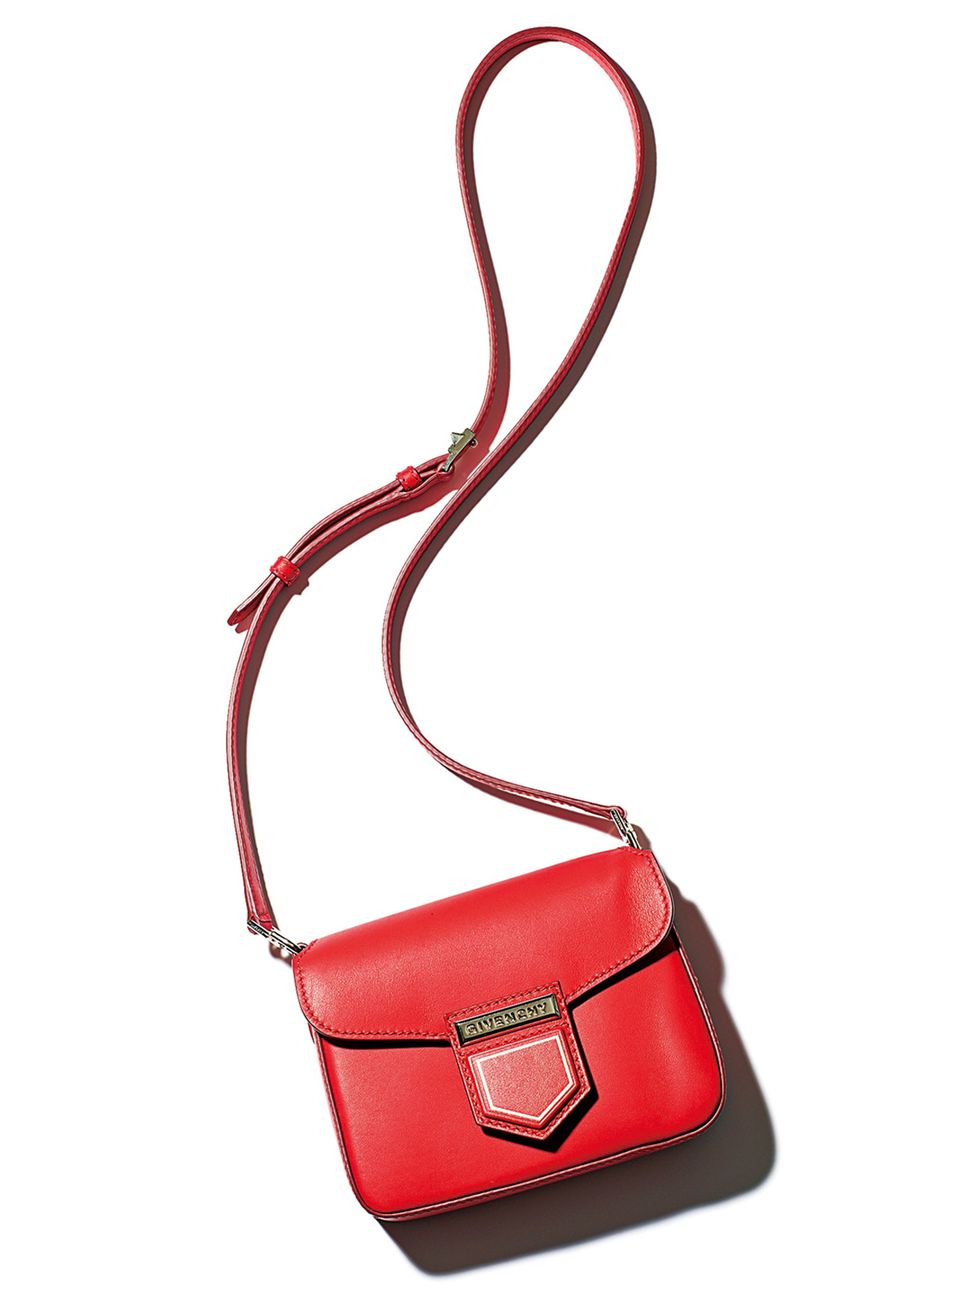 Product, Bag, Red, White, Fashion accessory, Shoulder bag, Carmine, Maroon, Strap, Leather, 